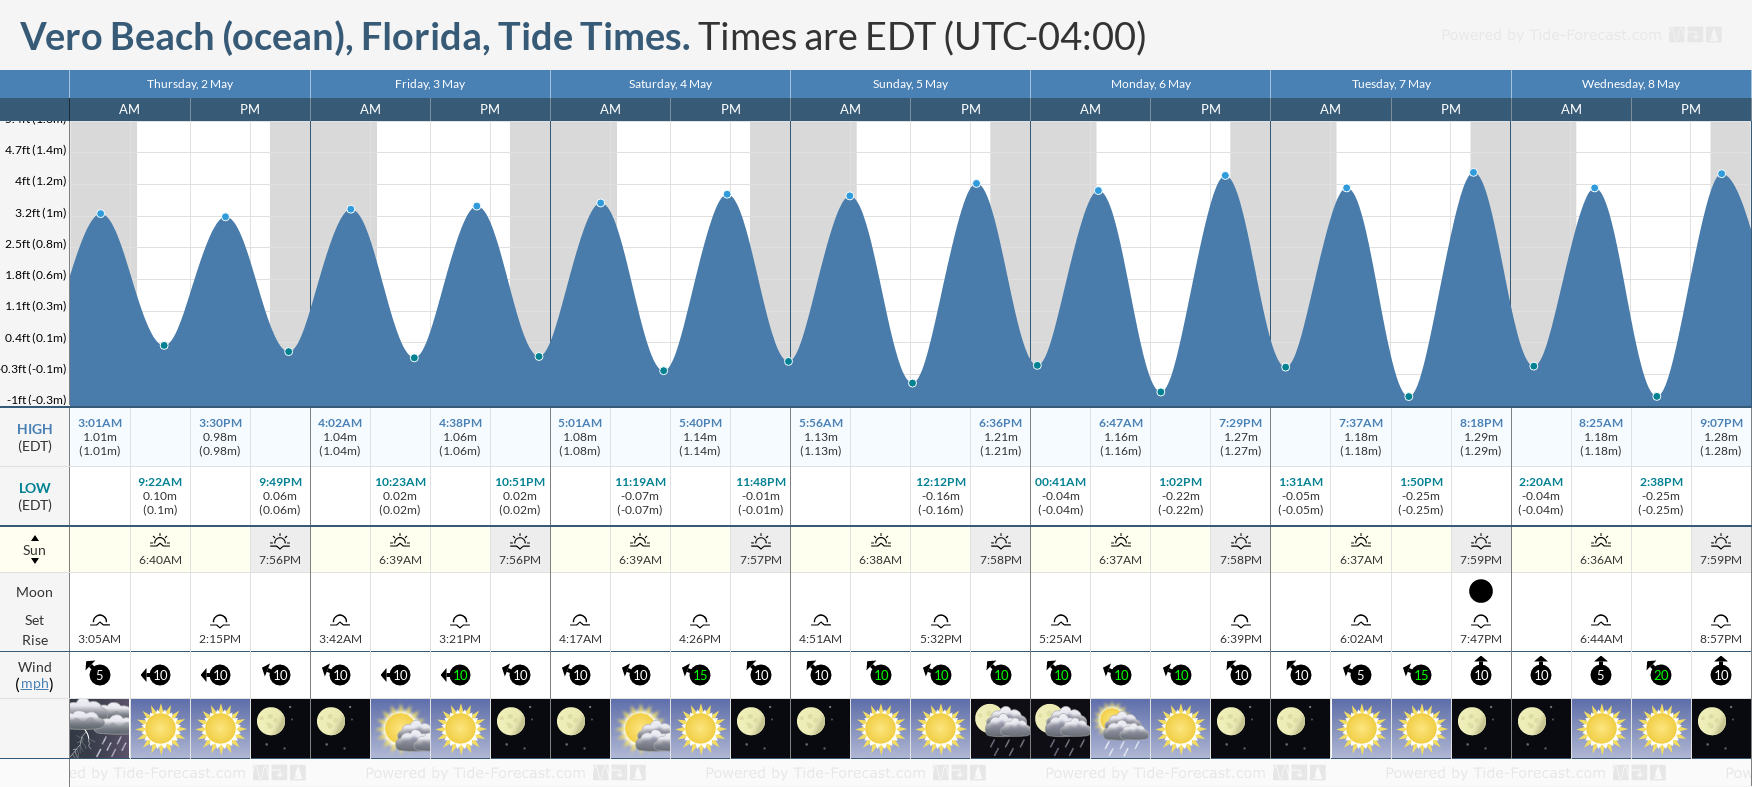 Vero Beach (ocean), Florida Tide Chart including high and low tide times for the next 7 days